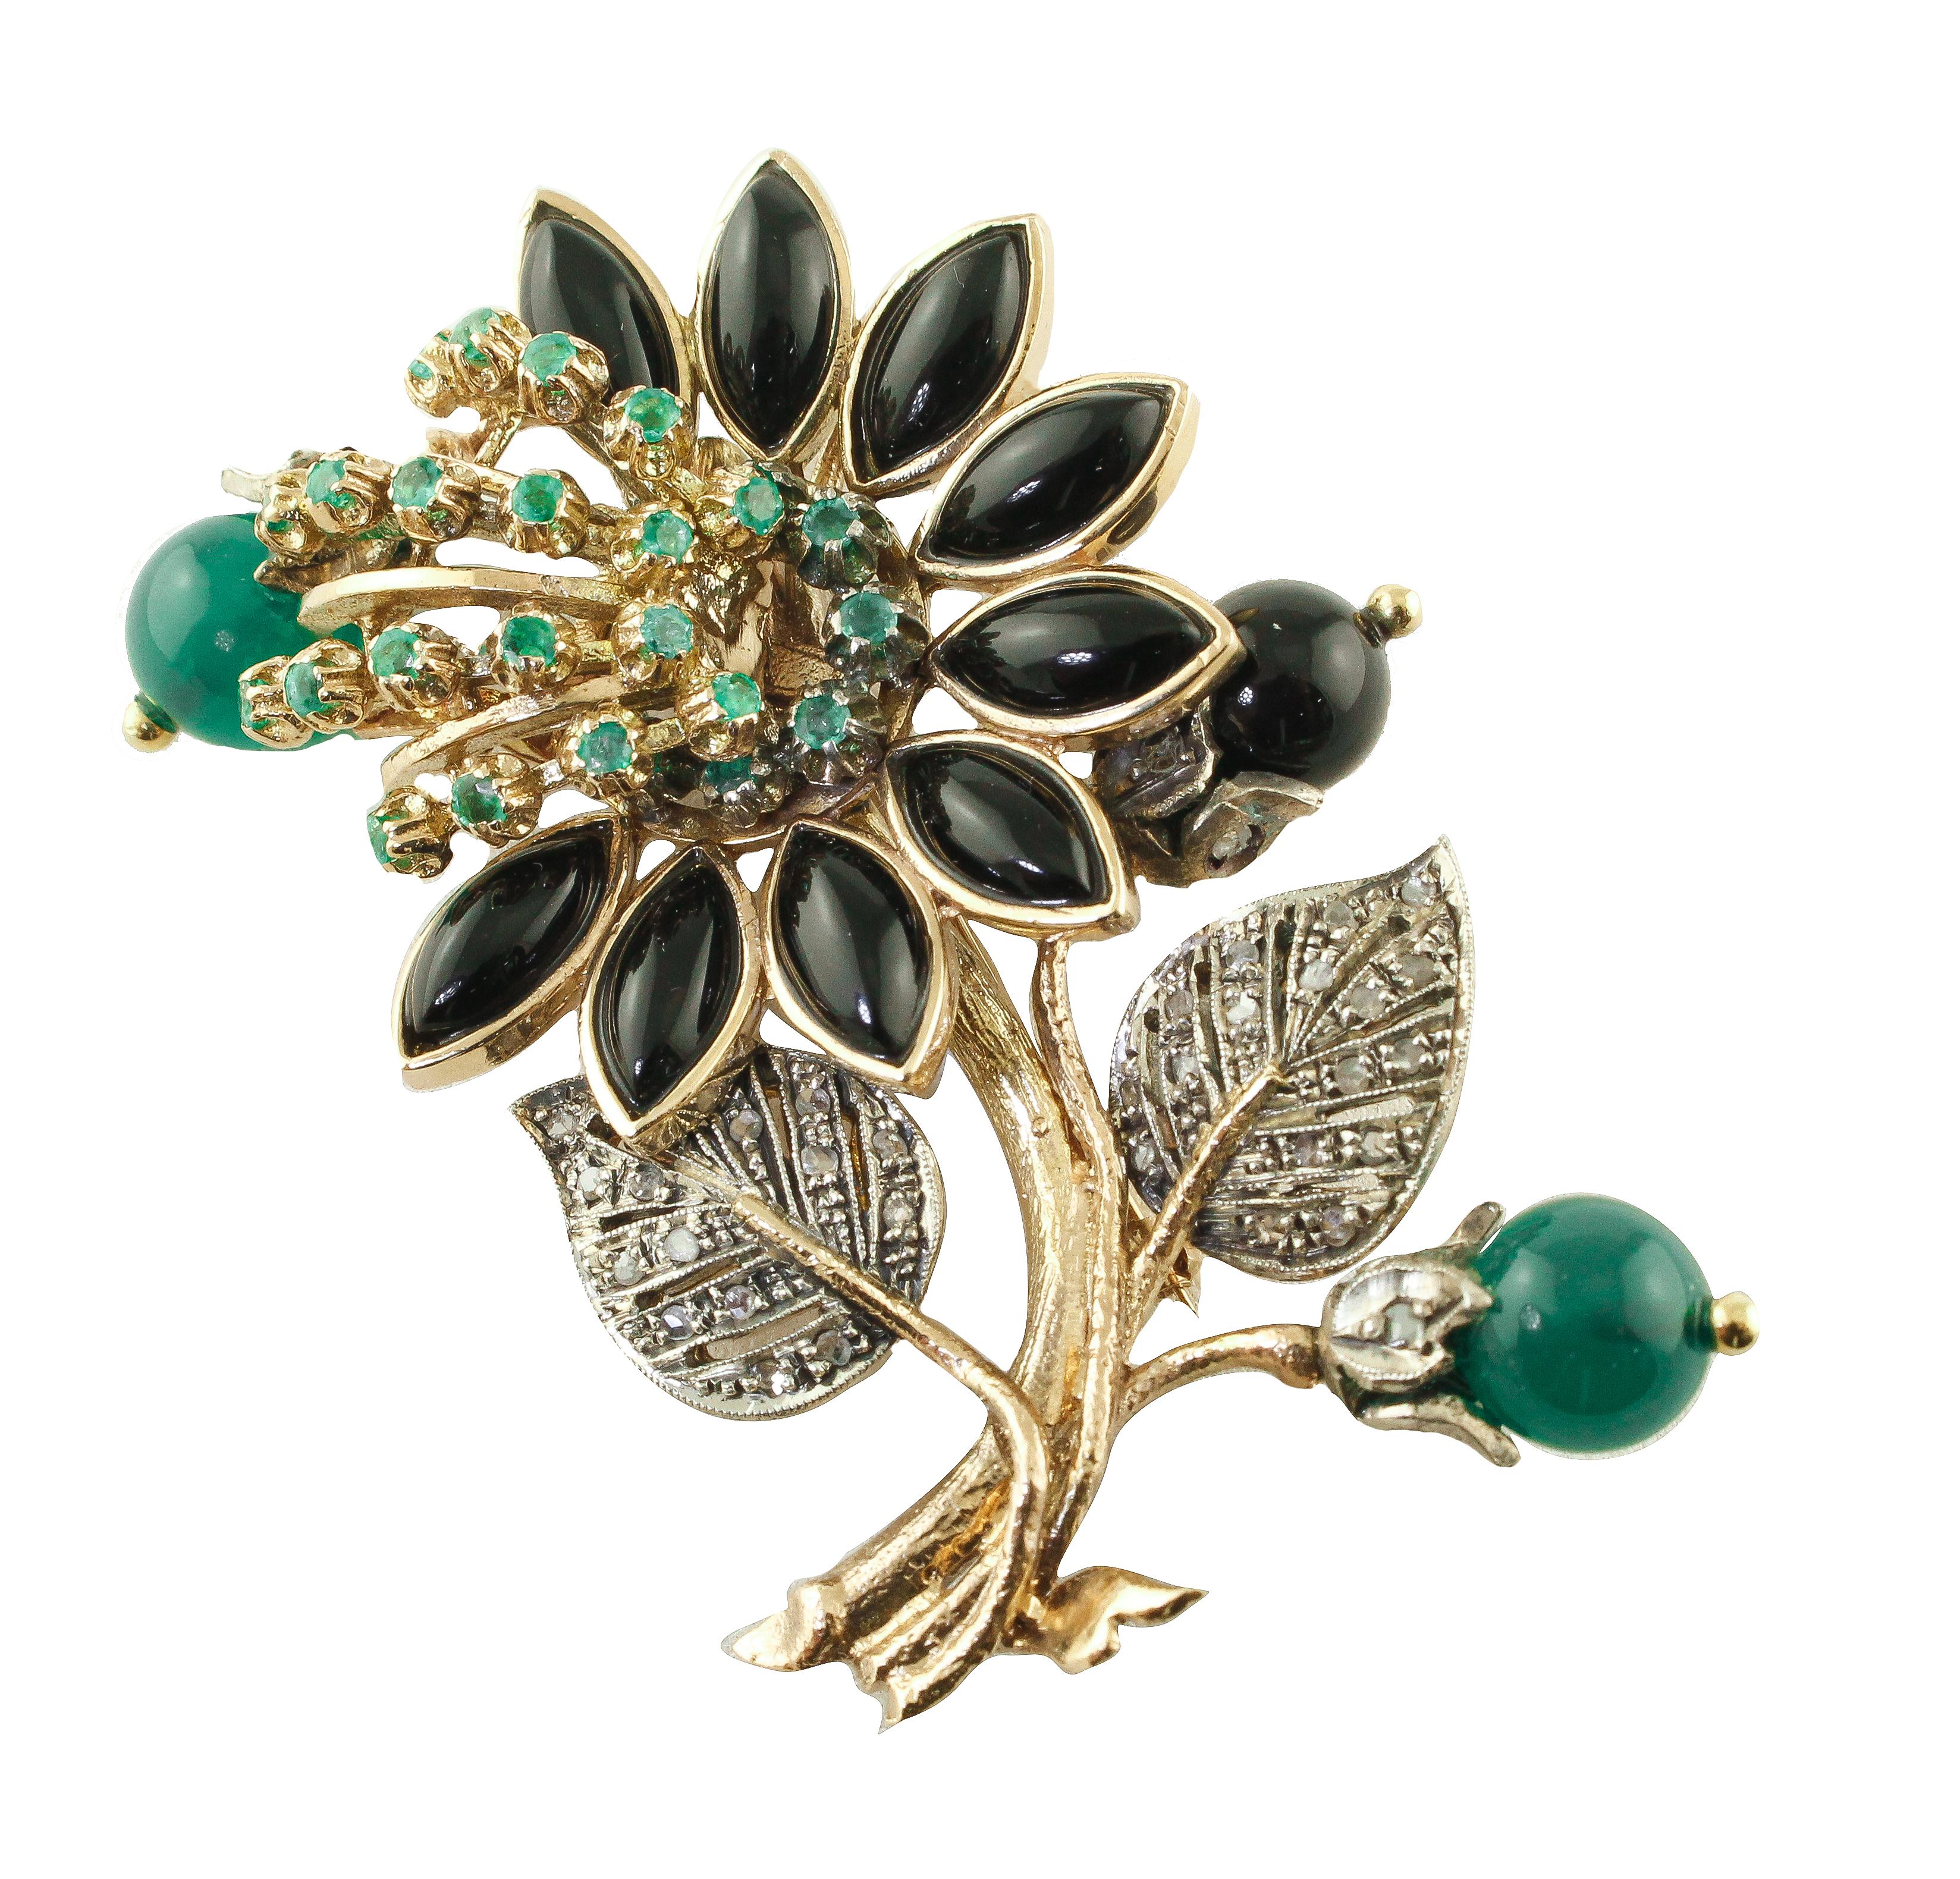 Diamonds Emeralds Onyx Green Agate Rose Gold and Silver Brooch